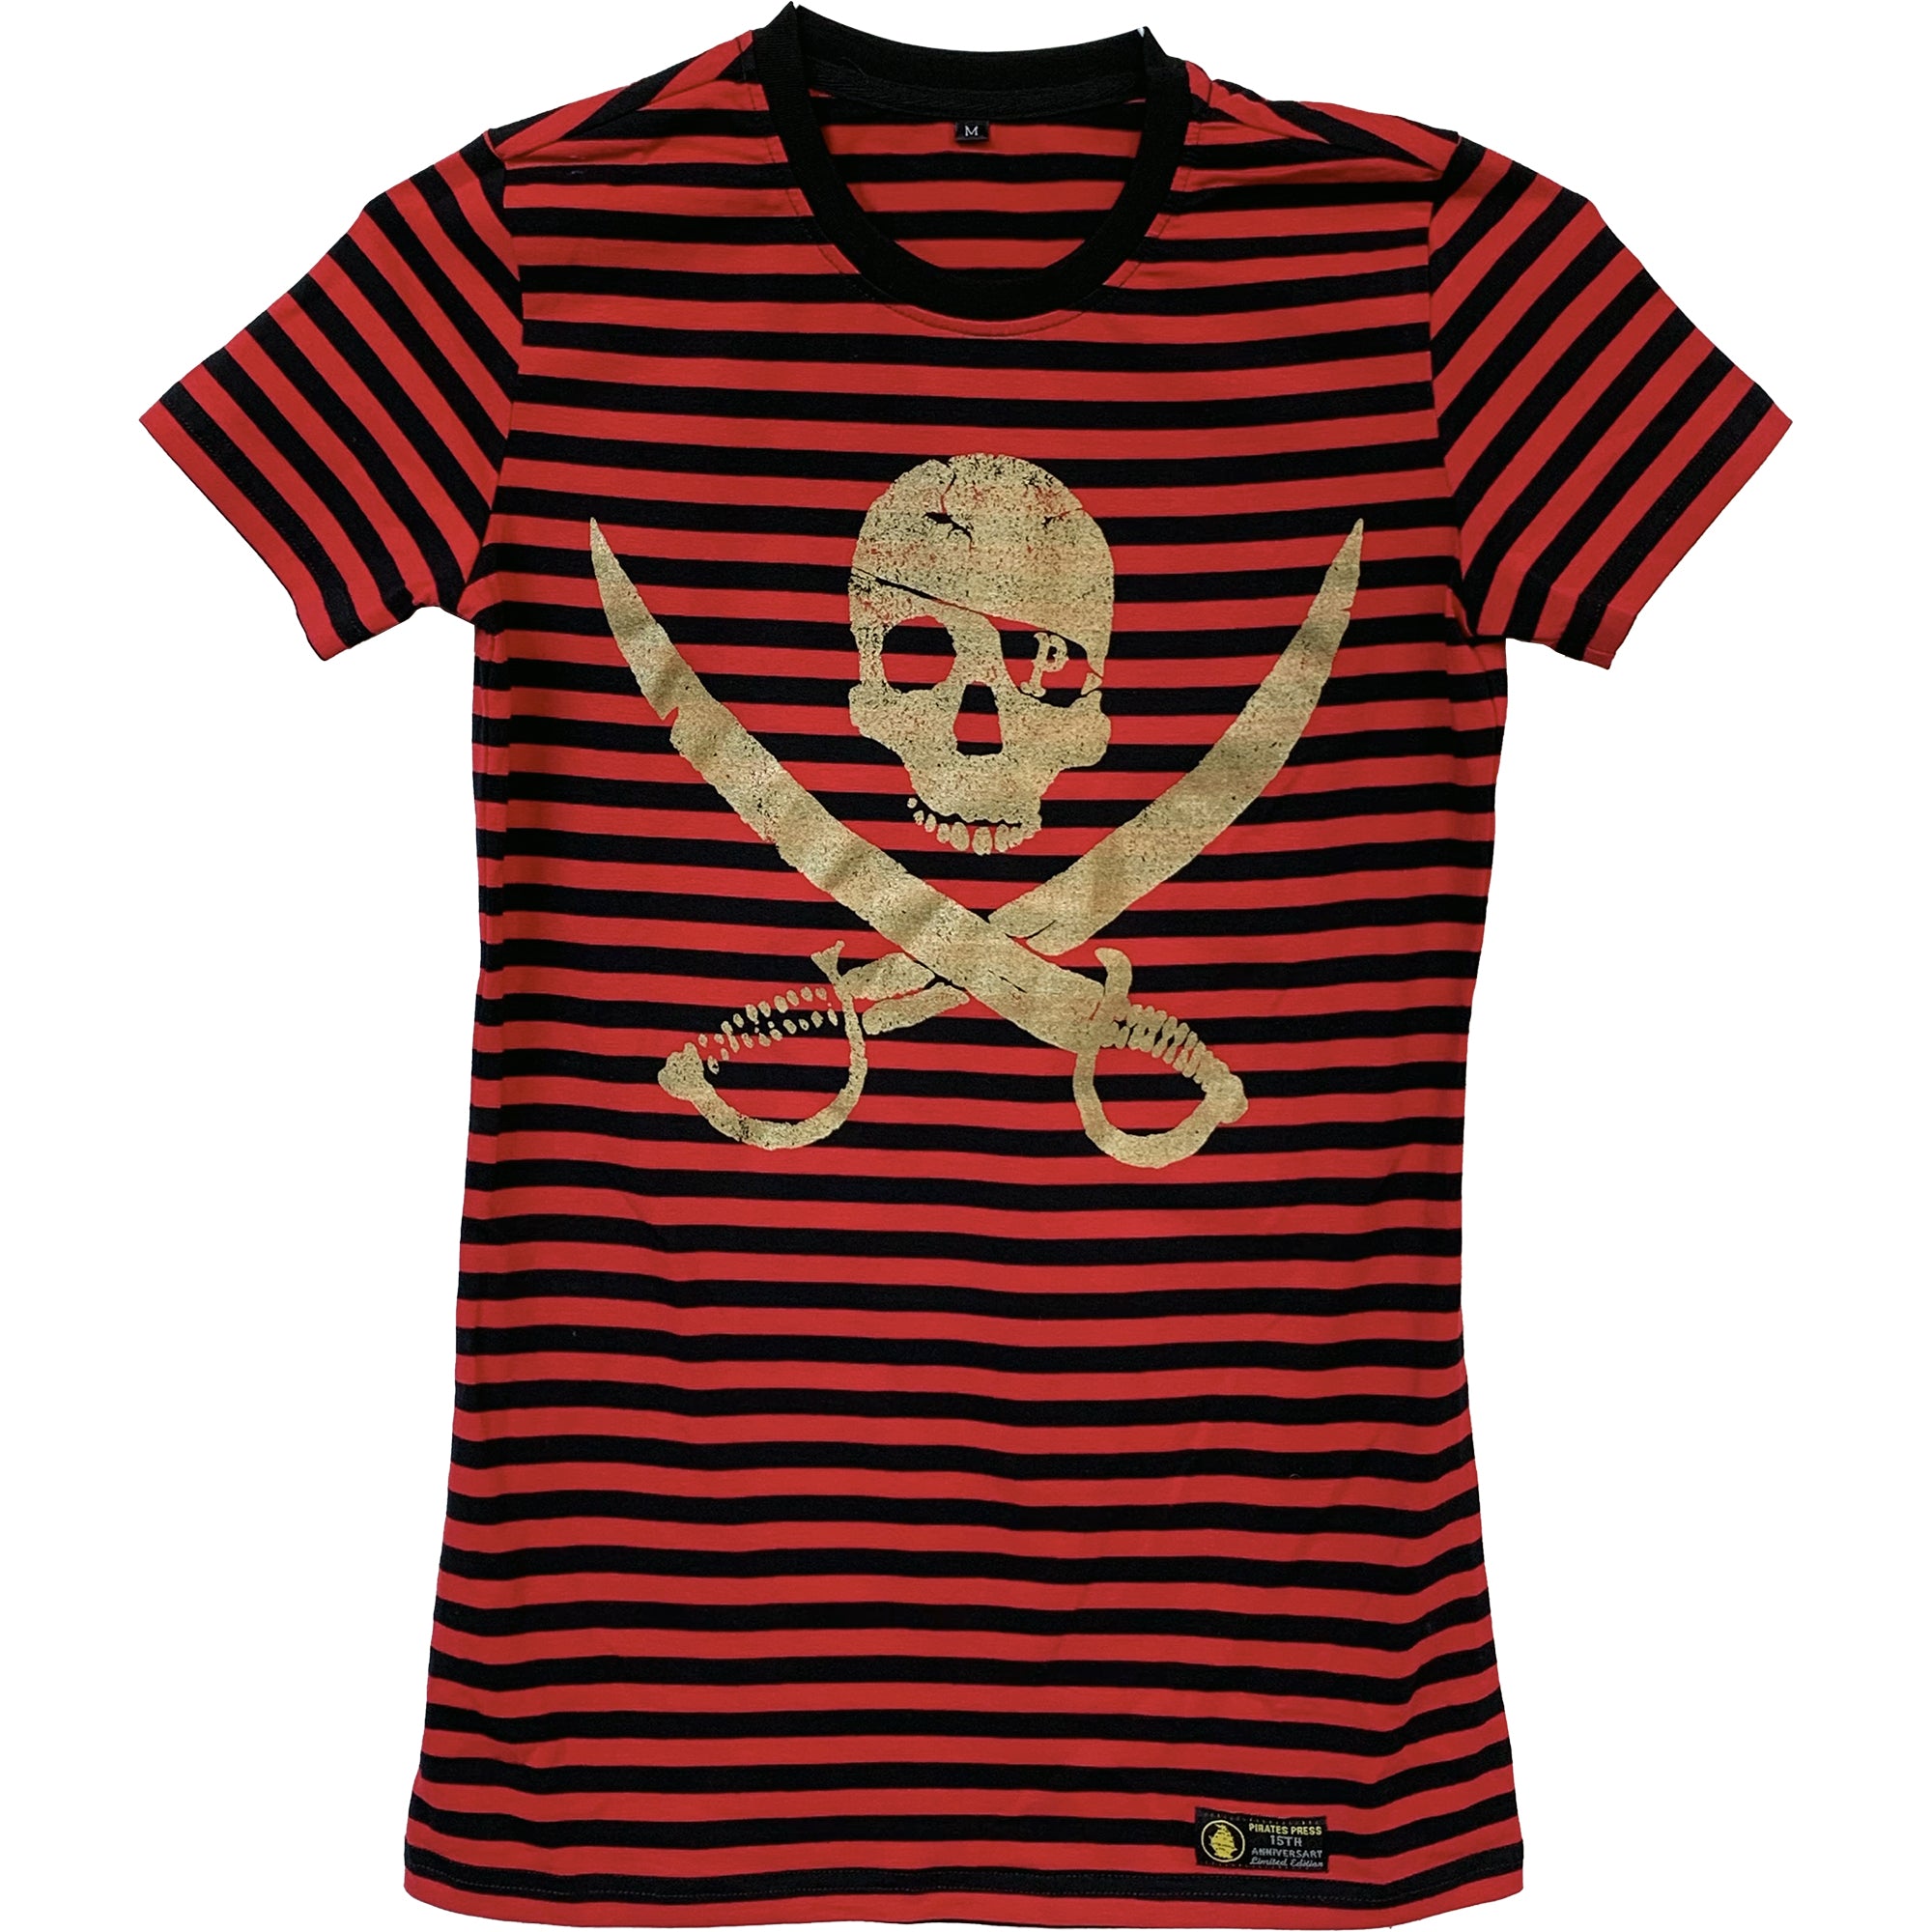 Pirates Press Records - Pirate Logo - Gold on Red & Black Striped  - 15 Year Tag - T-Shirt - Fitted